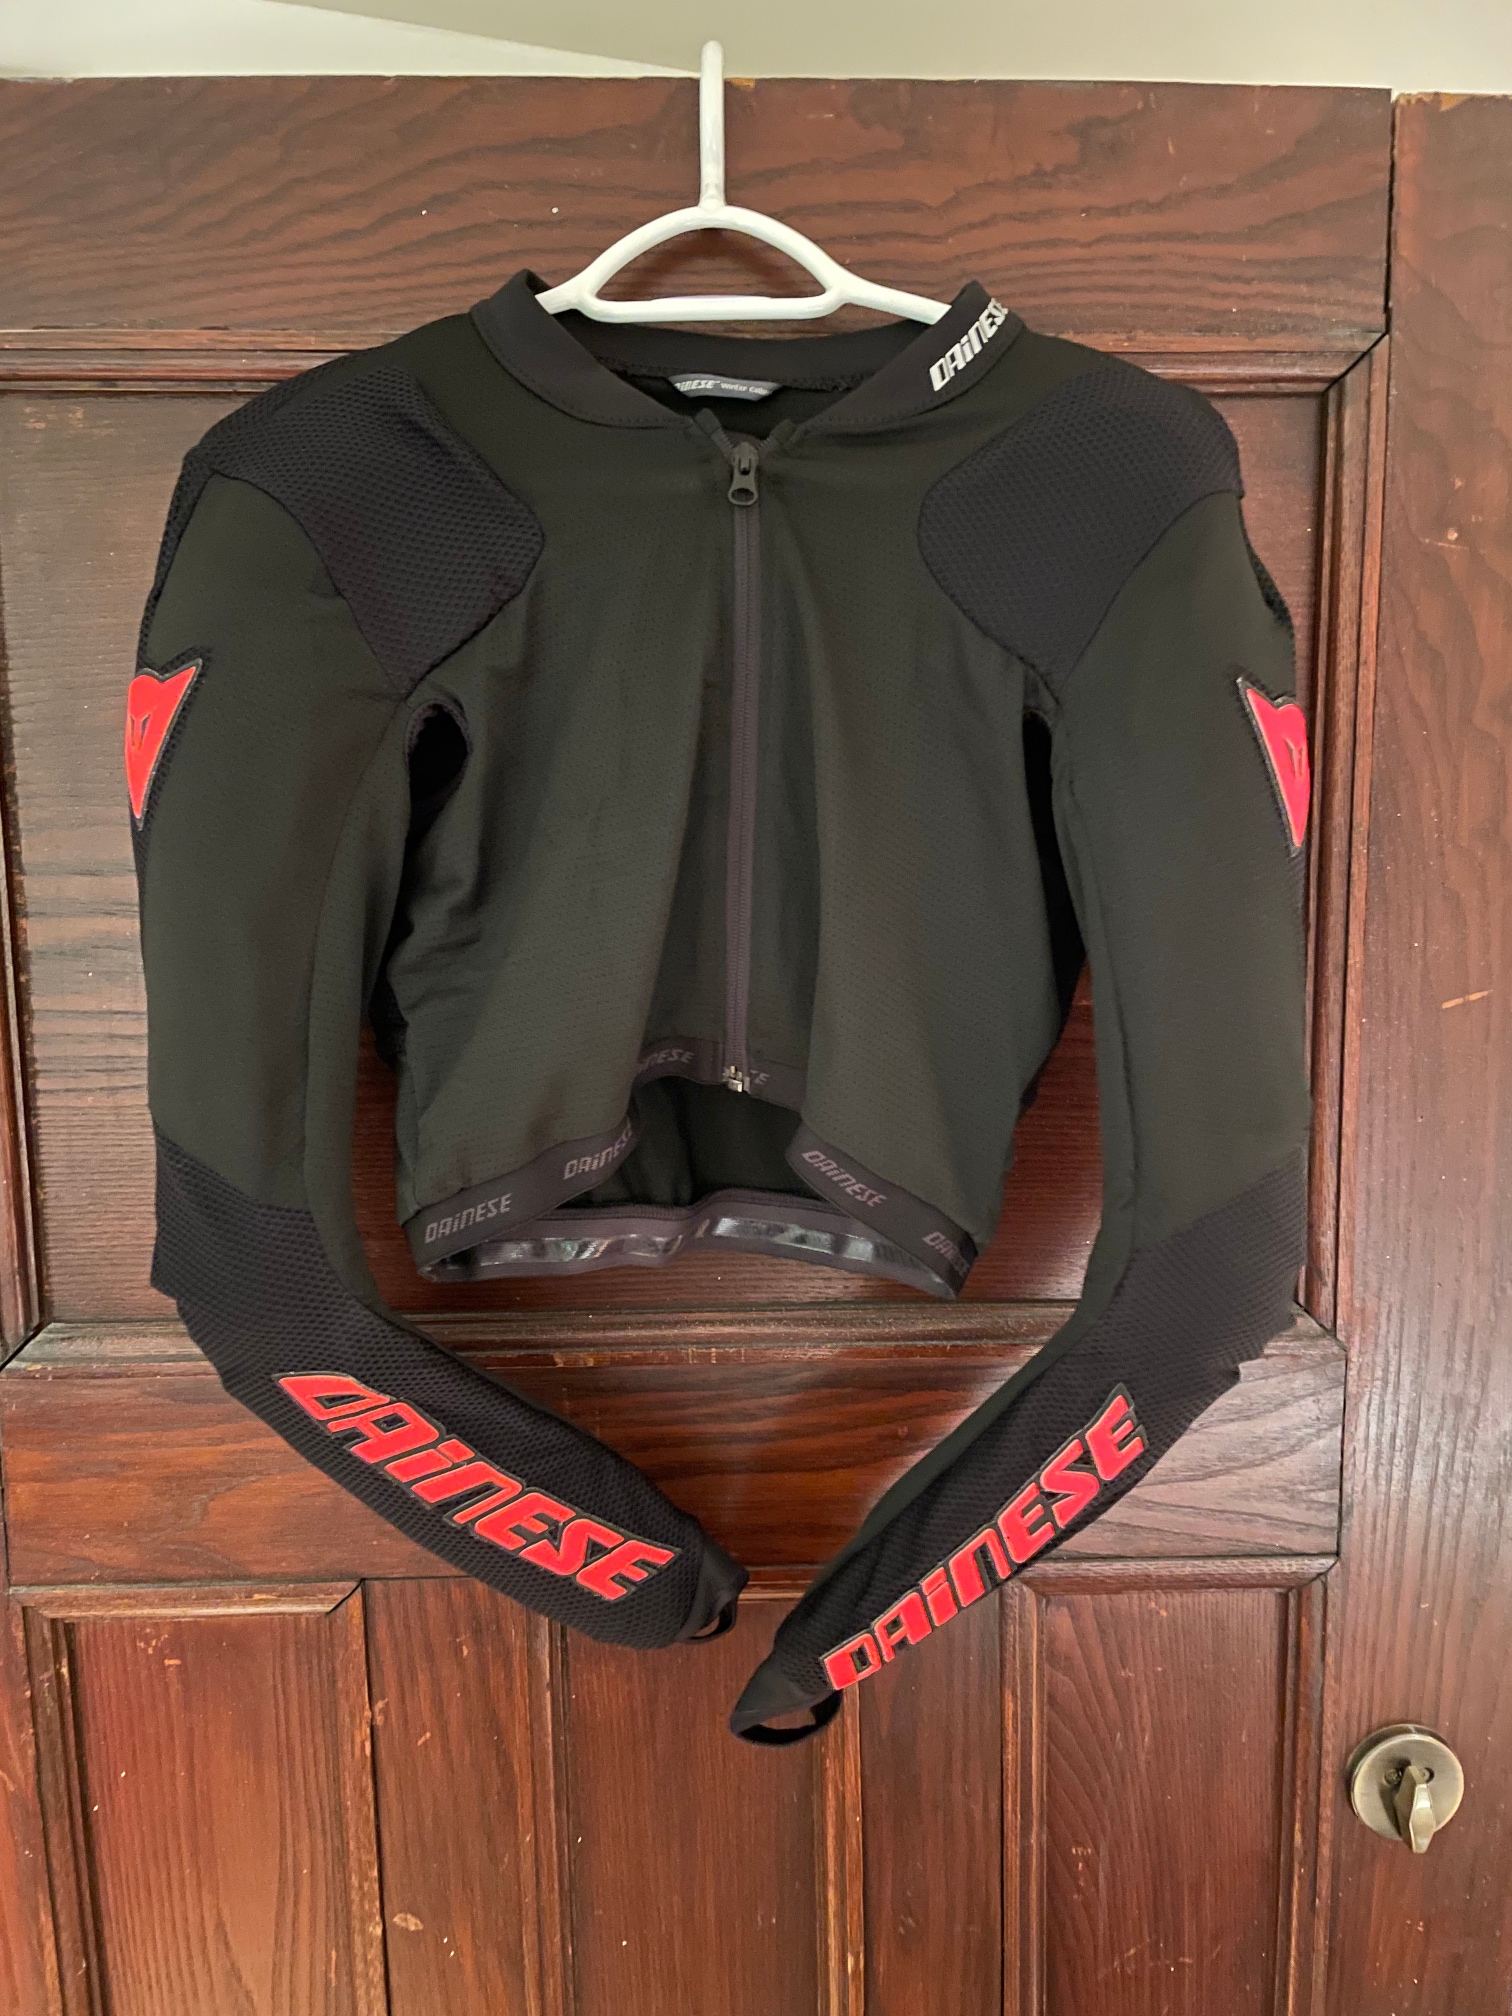 New Large Dainese Top Body Armor